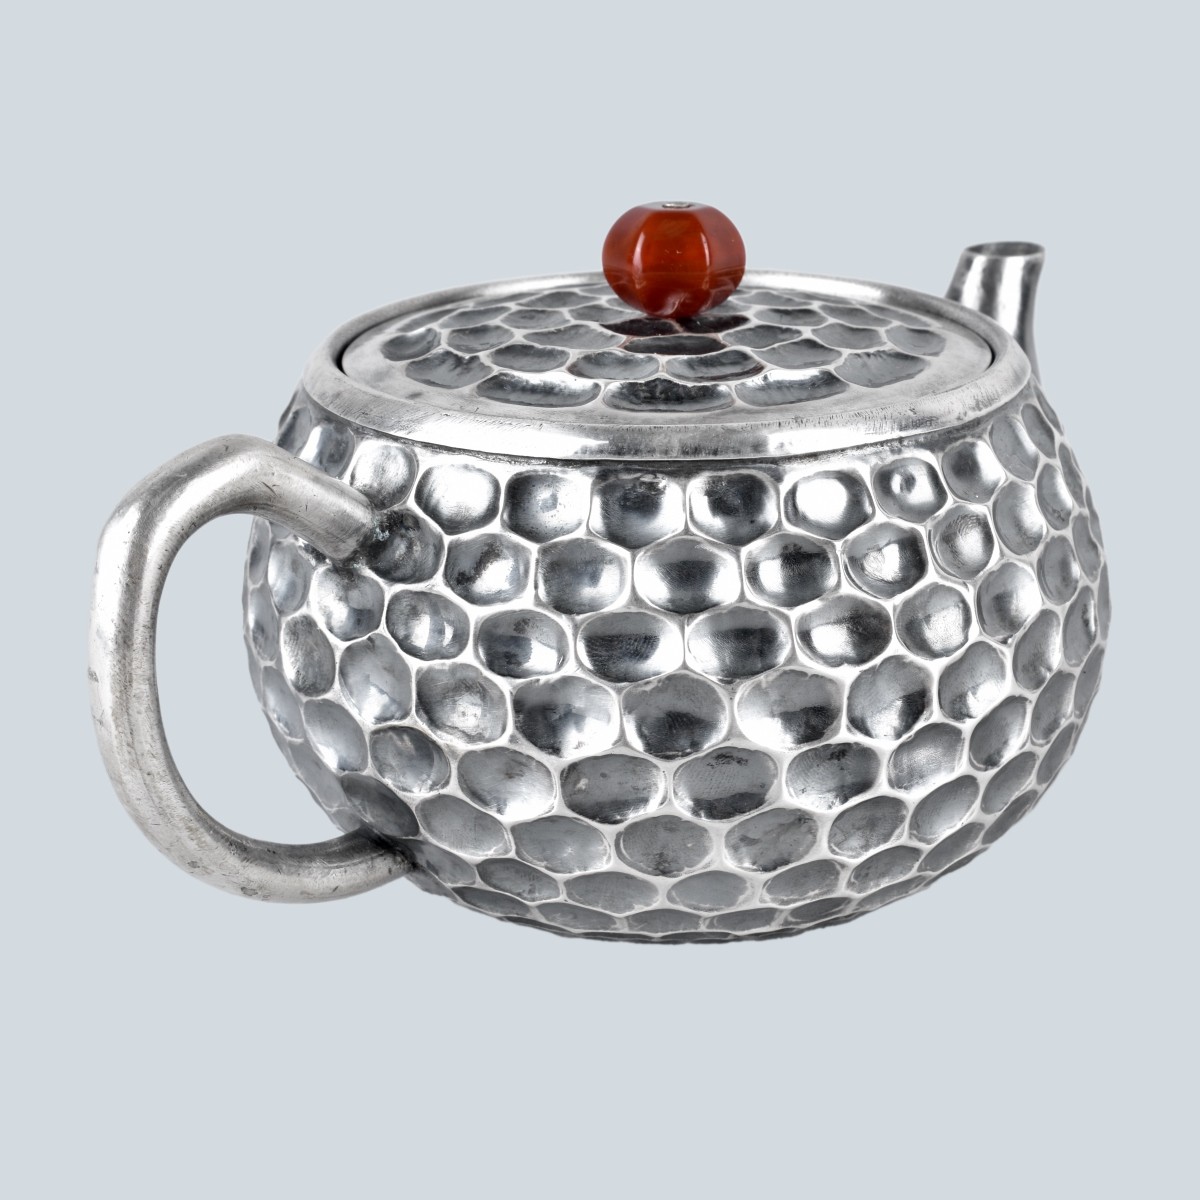 Chinese Export Silver Teapot